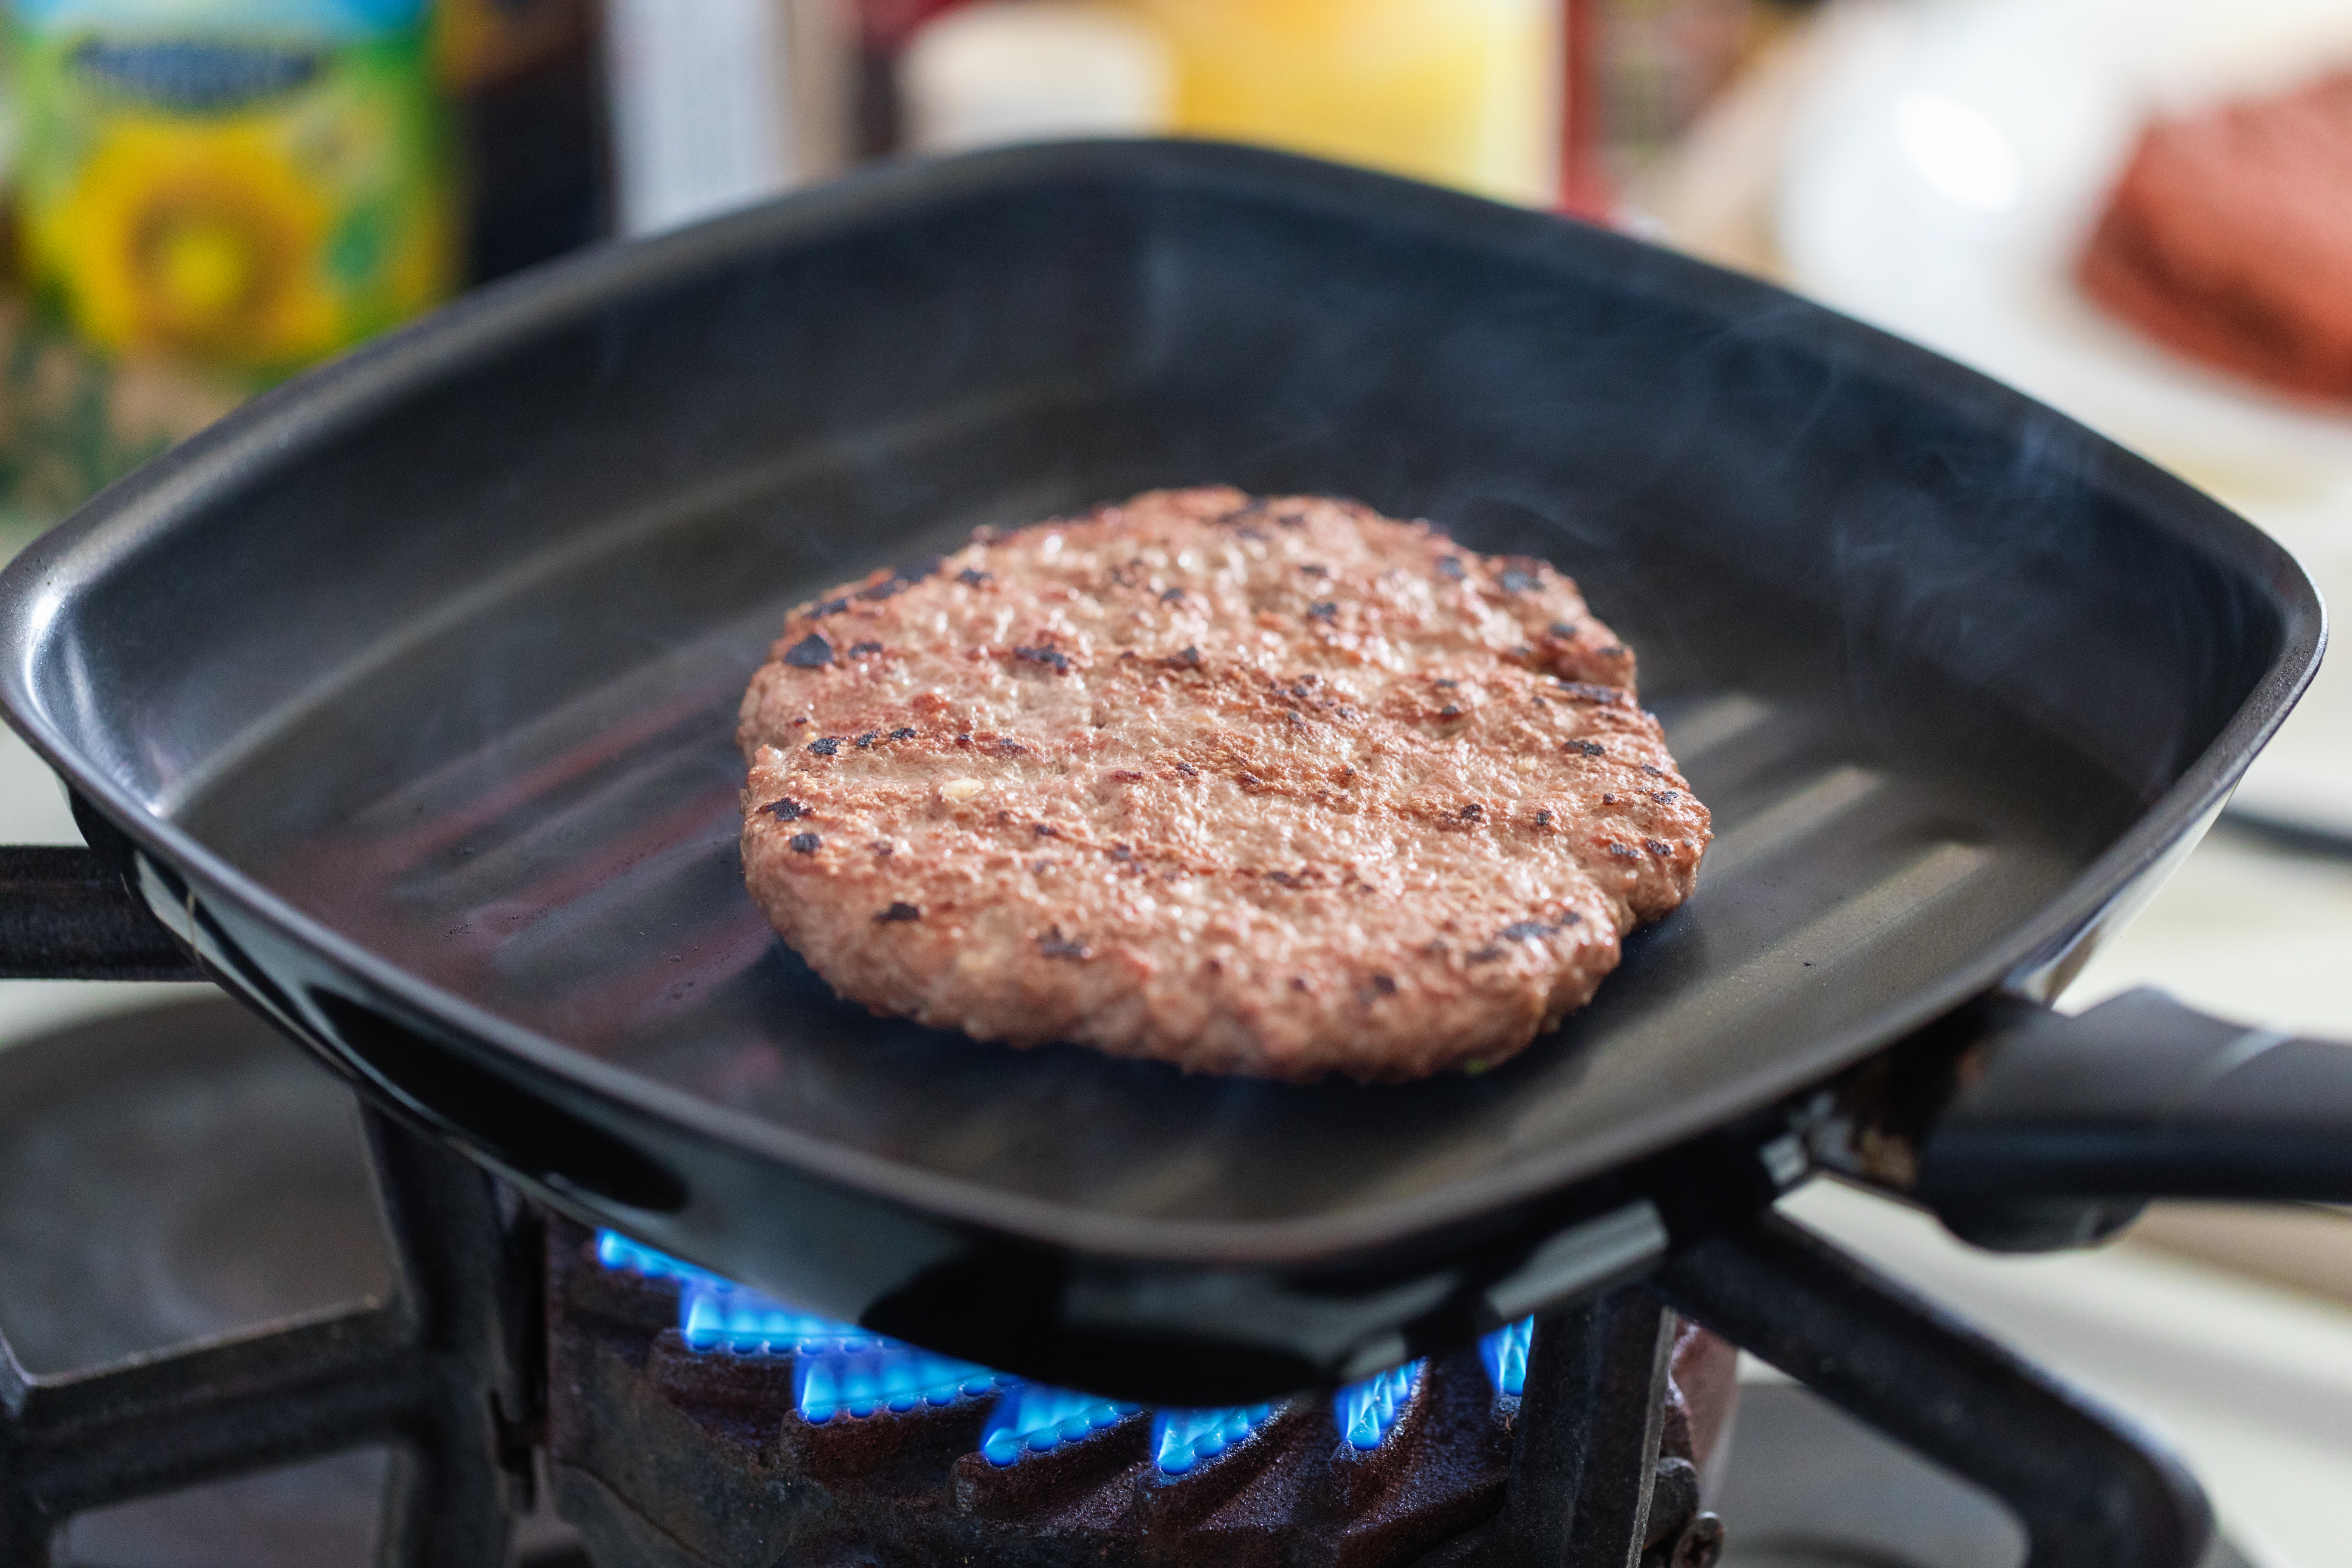 A hamburger patty cooking in a frying pan on a lit gas stove